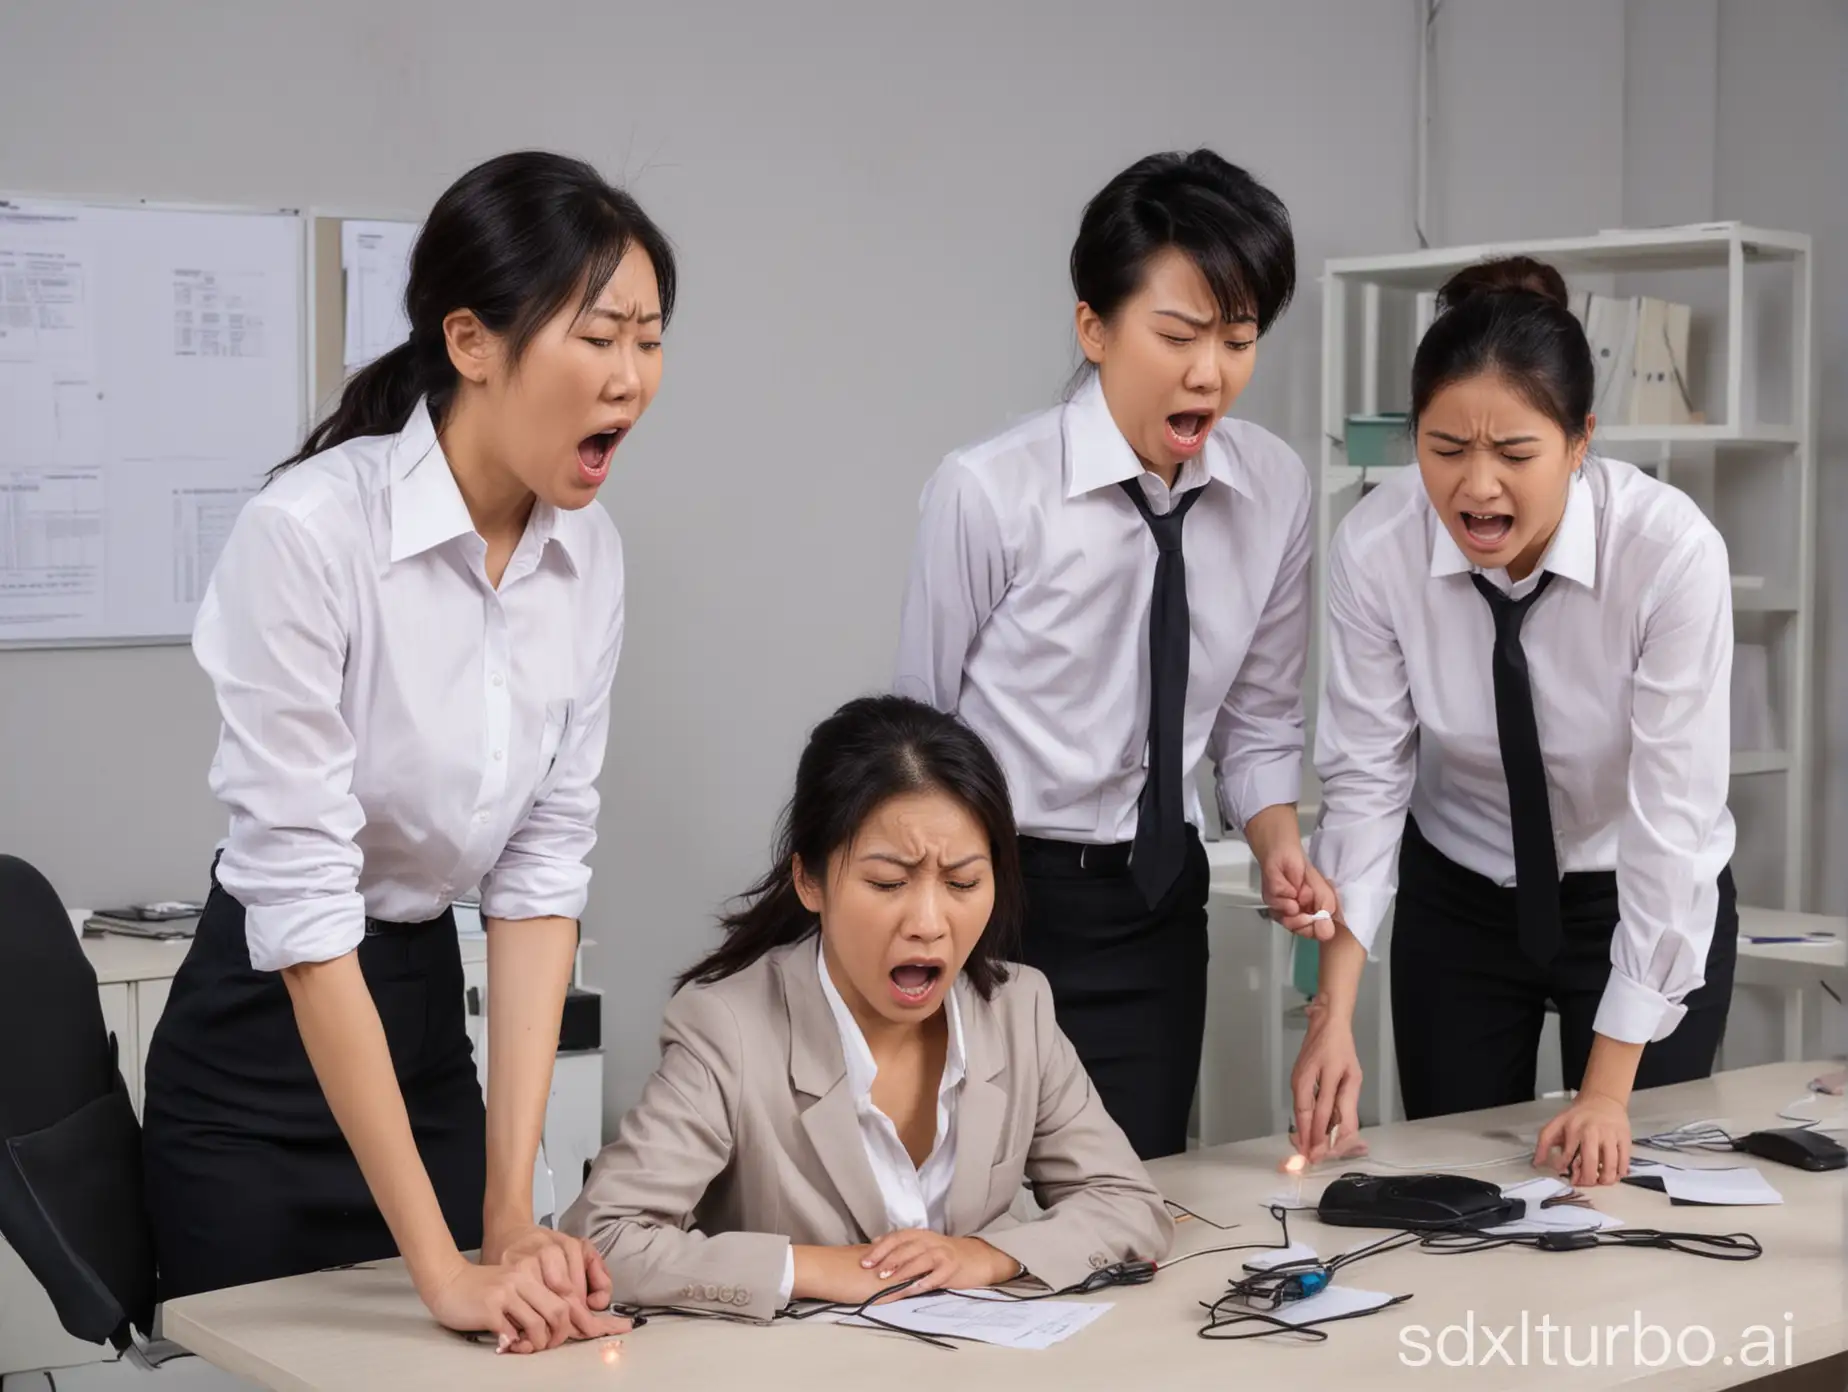 Asian-Woman-in-Office-Attire-Receives-Electric-Shock-While-Colleagues-Look-On